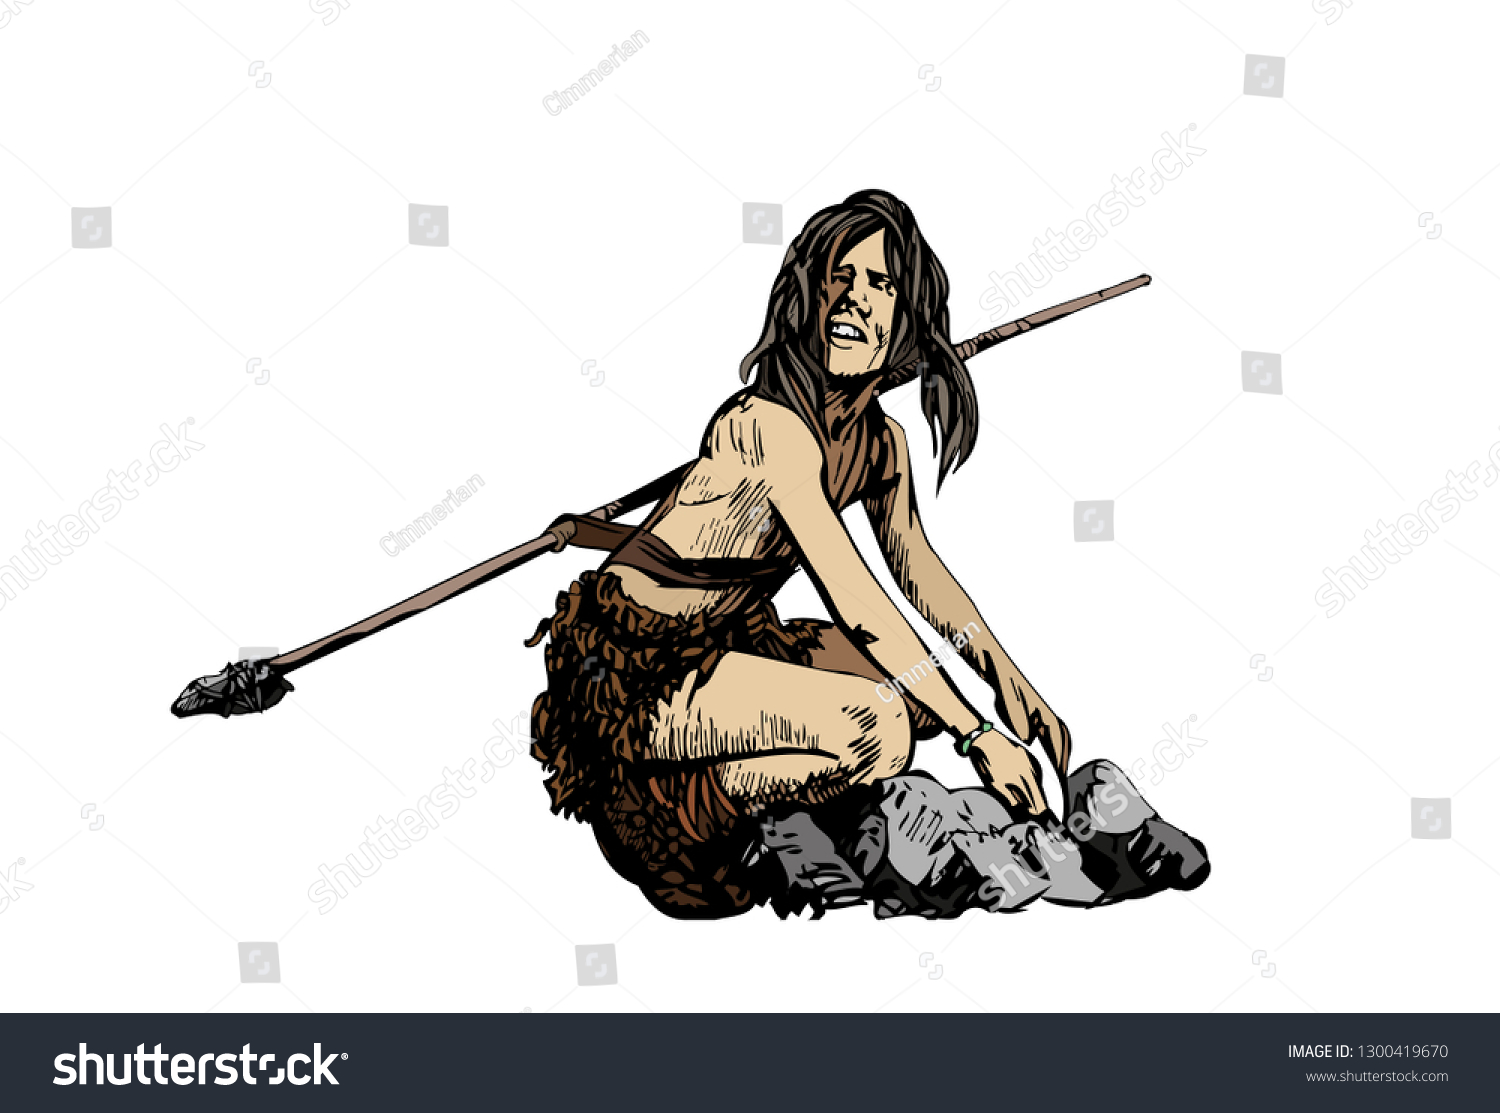 SVG of CRO-magnon, the young man with a spear (Homo sapiens). In the same portfolio there is a monochrome image. svg